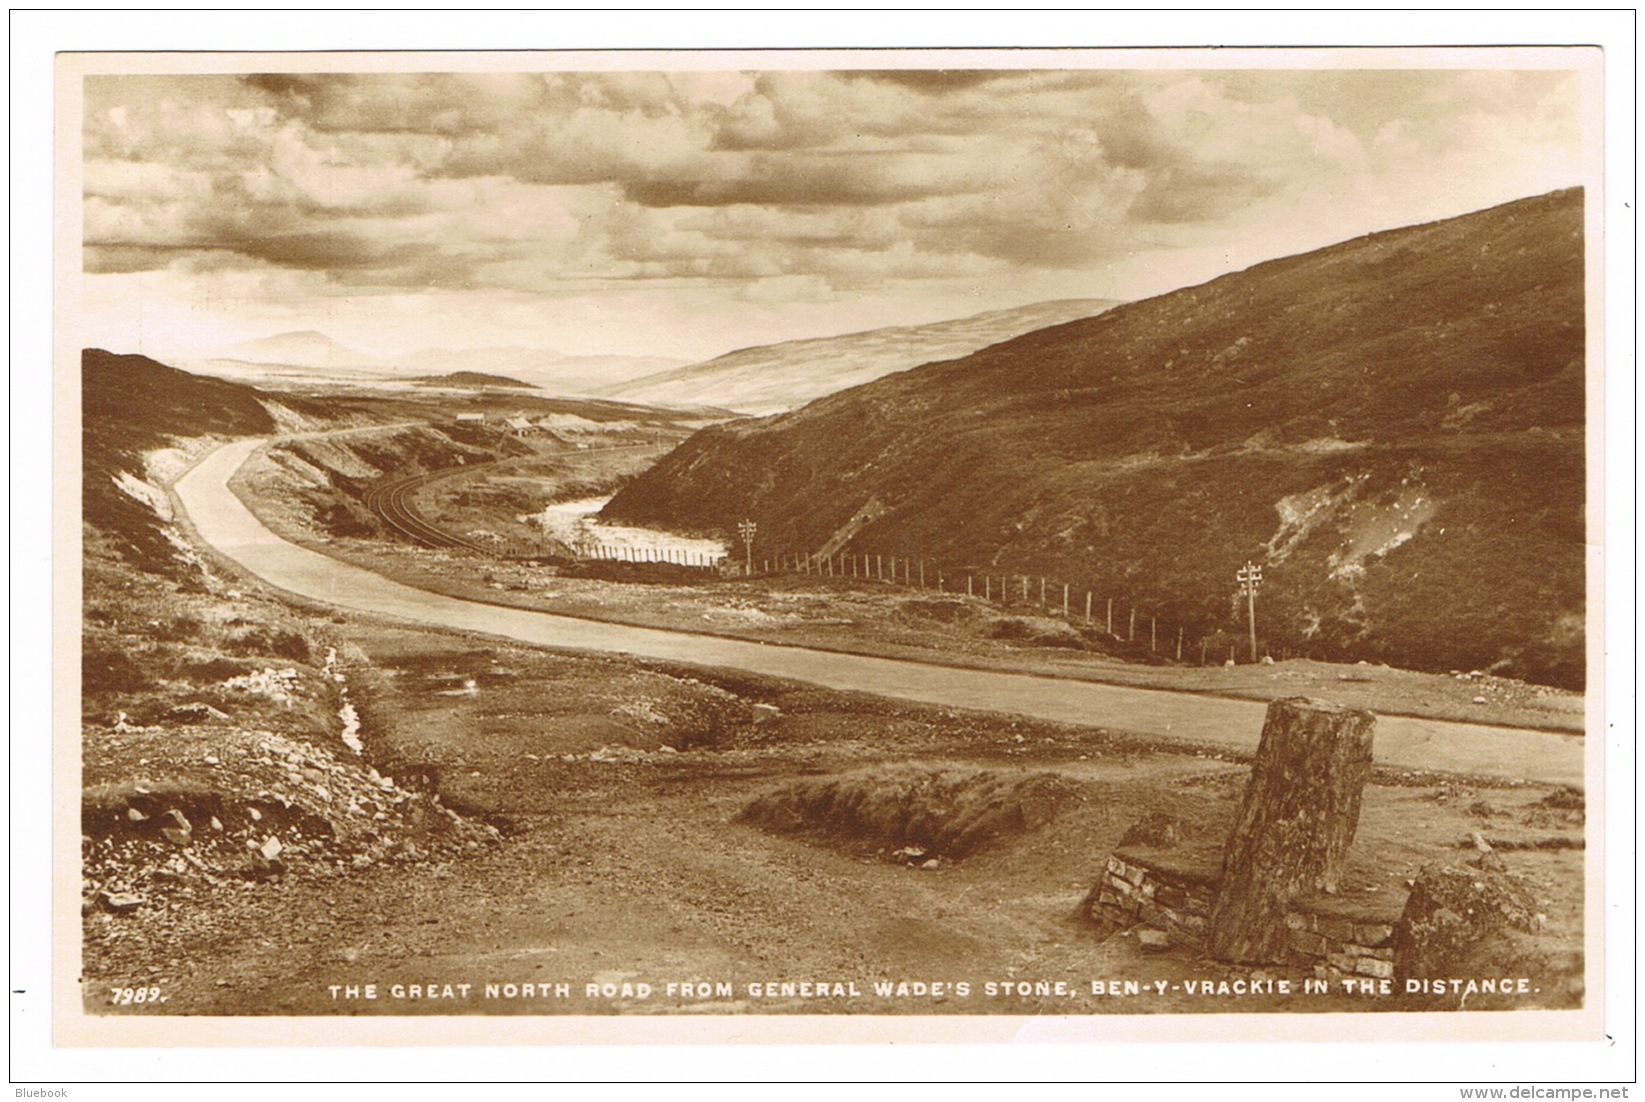 RB 1153 - Real Photo Postcard - Great North Road Fro General Wade's Stone - Perthshire Scotland - Perthshire